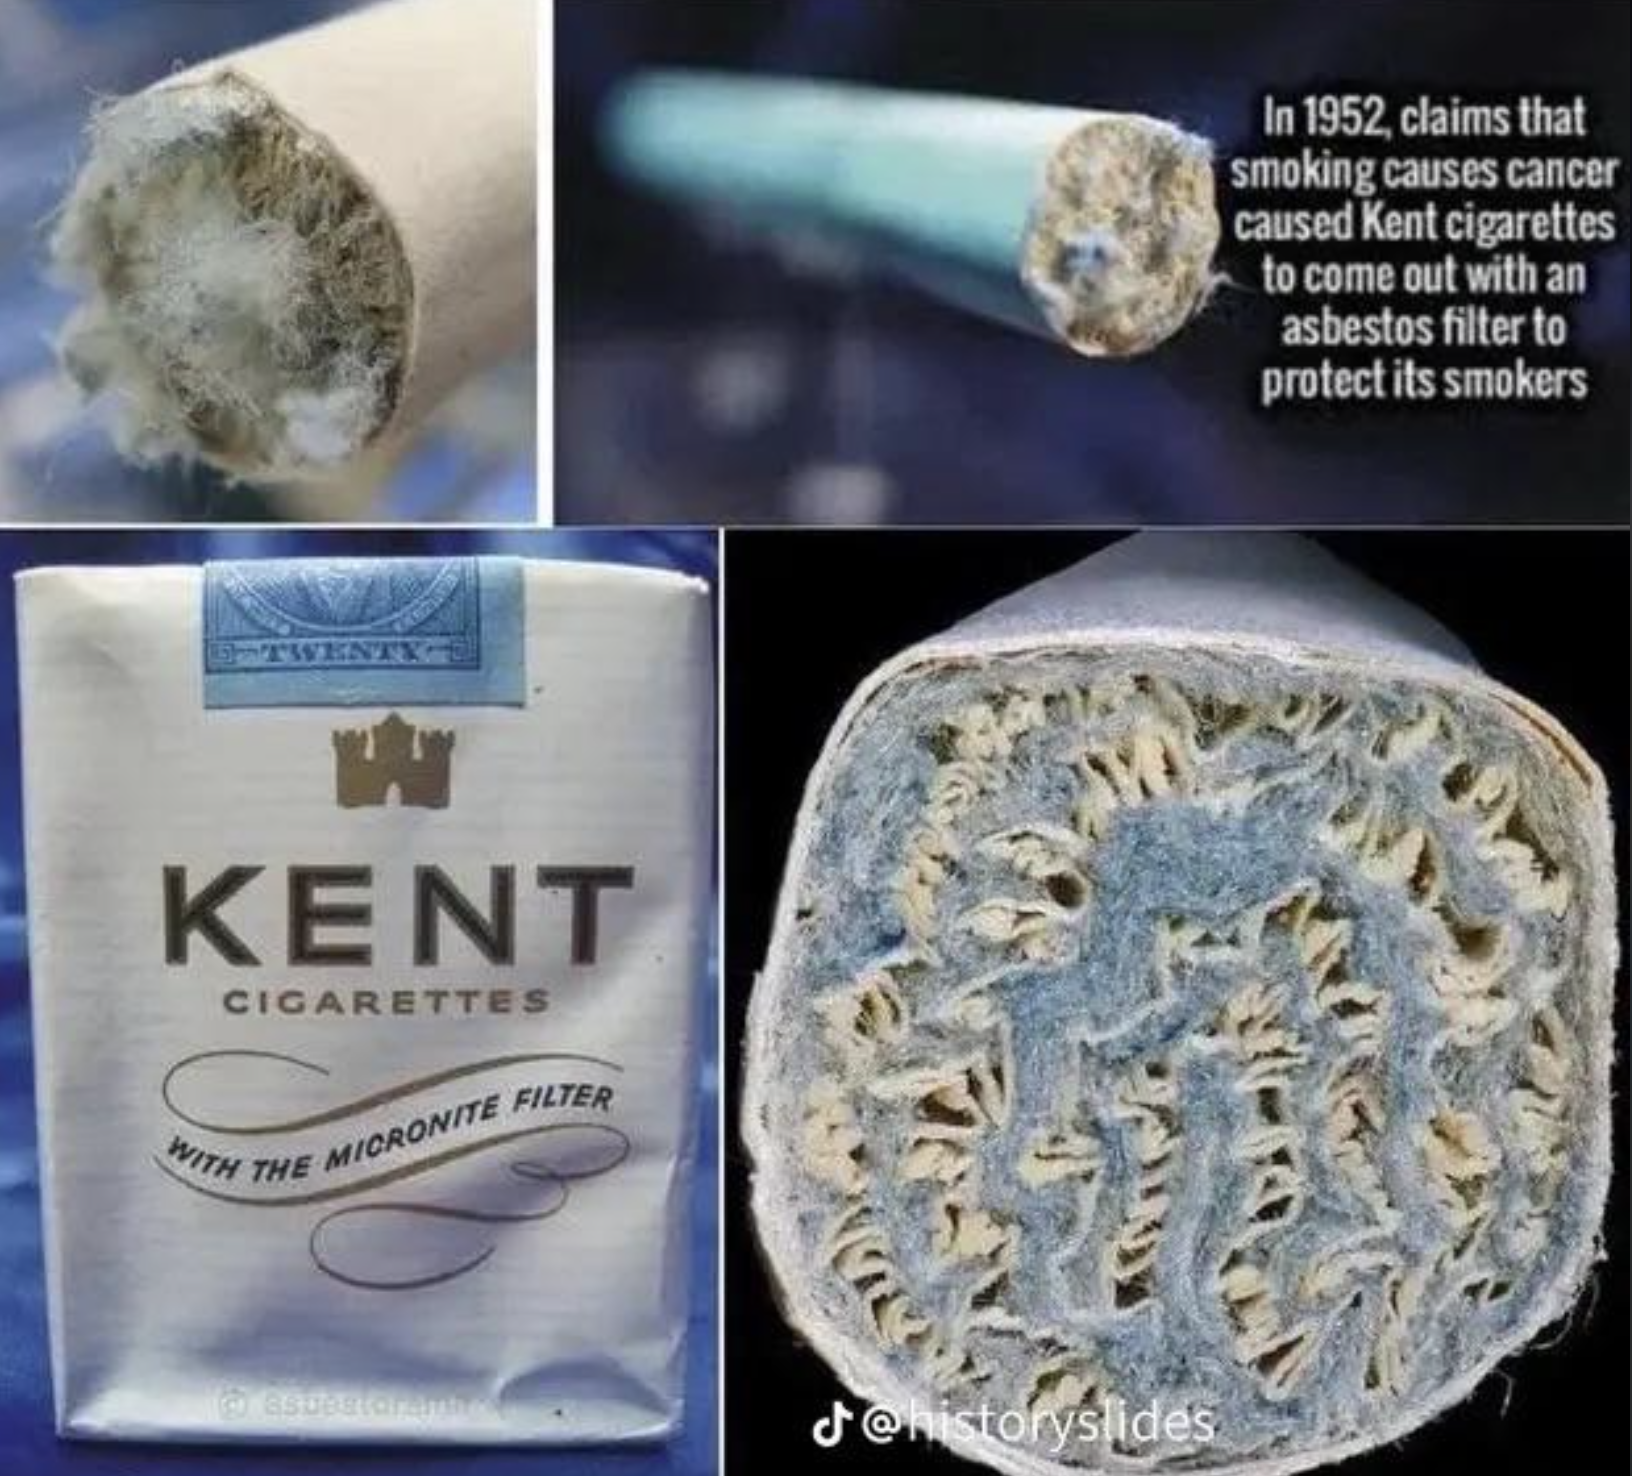 kent asbestos filter - Kent Cigarettes With The Micronite Filter J In 1952, claims that smoking causes cancer caused Kent cigarettes to come out with an asbestos filter to protect its smokers